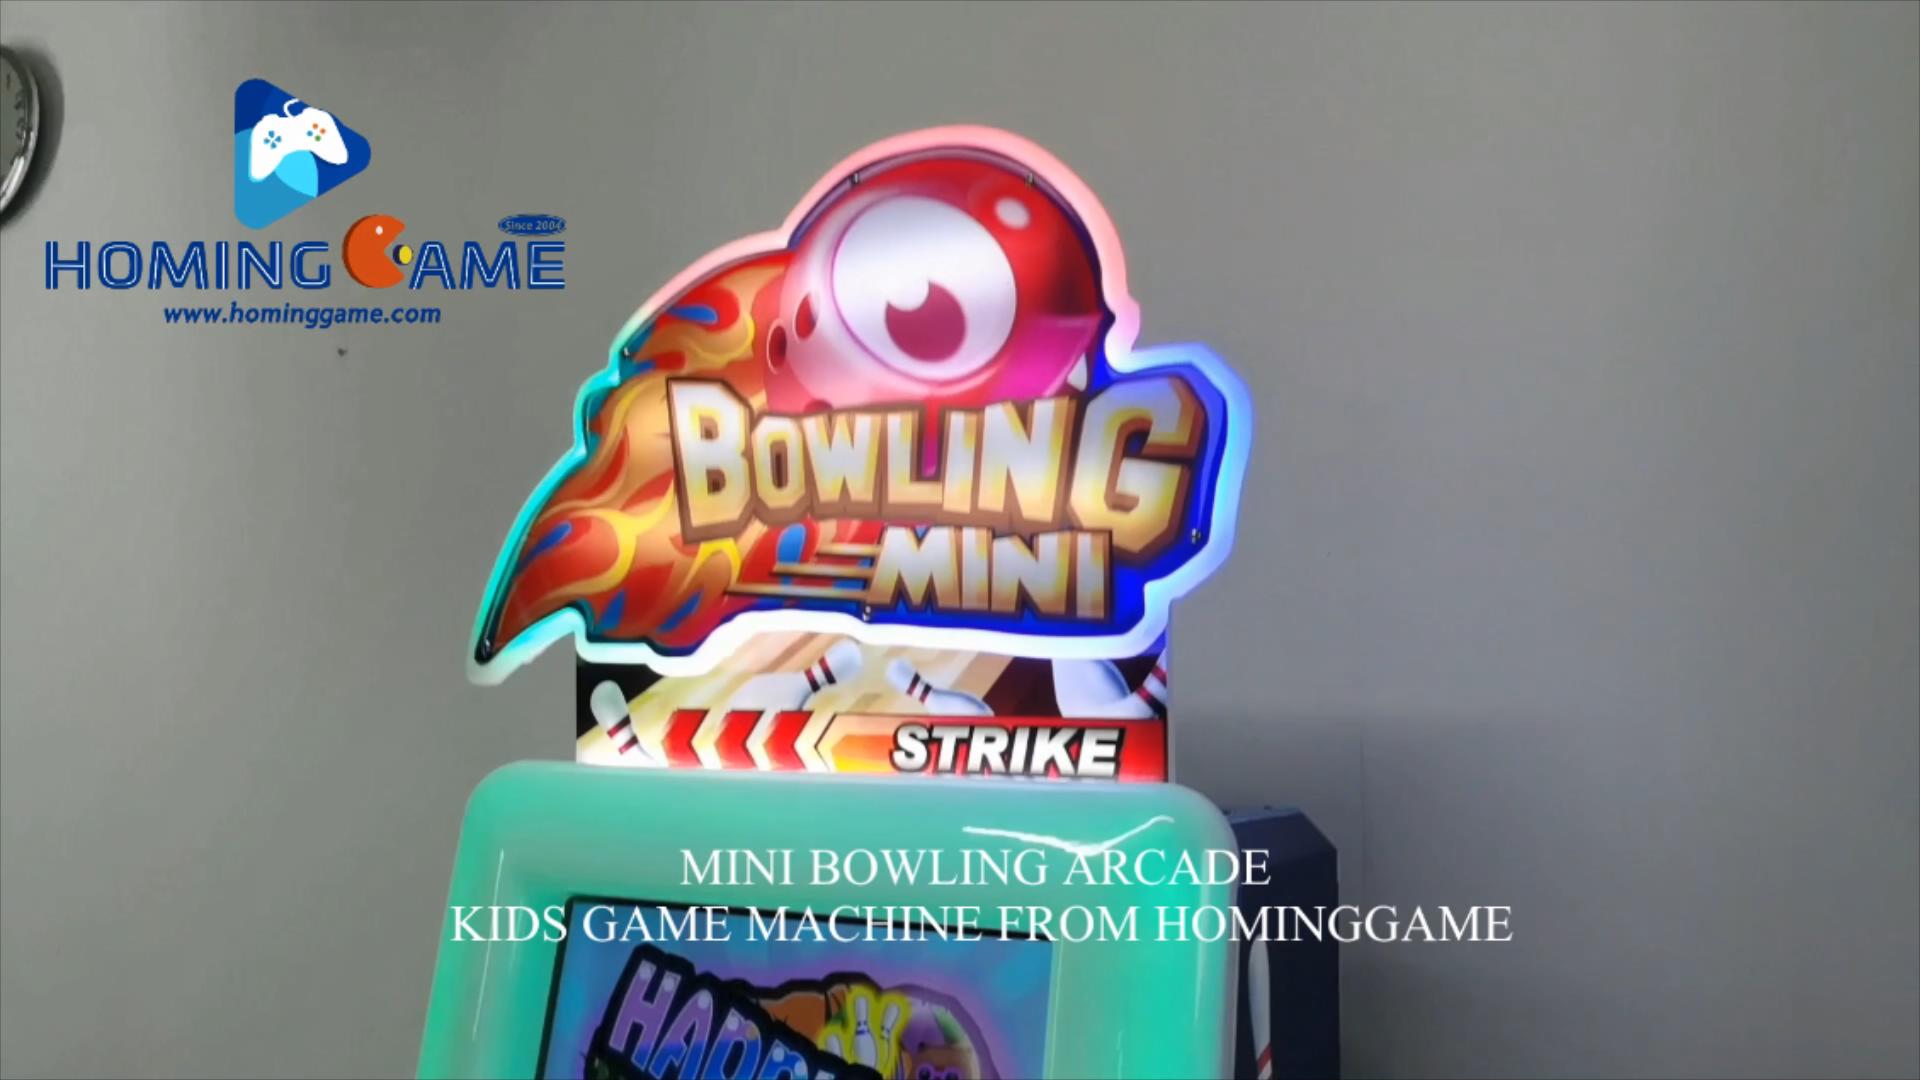 2021 HomingGame Newest Family entertainment Game Machine Mini Bowling Kids Video Lottery arcade game machine(order call whatsapp:+8618688409495),mini bowling game machine,mini kids bowling game machine,mini bowling strike arcade game machine,mini bowling strike video game machine,fancy bowling arcade game machine,fancy bowling simulator redemption game machine,fancy bowling kids redemption game machine,fancy bowling game machine,fancy bowling,family bowling,family bowling arcade game machine,game machine,arcade game machine,coin operated game machine,indoor game machine,entertainment game,family entertainment,bowling game machine,redemption machine,kids game machine,lottery game machine,lottery ticket game machine,hominggame,www.hominggame.com,gametube,gametube.hk,www.gametube.hk,entertainment game machine,redemption ticket game machine,ticket game machine,ticket machine,indoor game,amusement park game equipment,game equipment